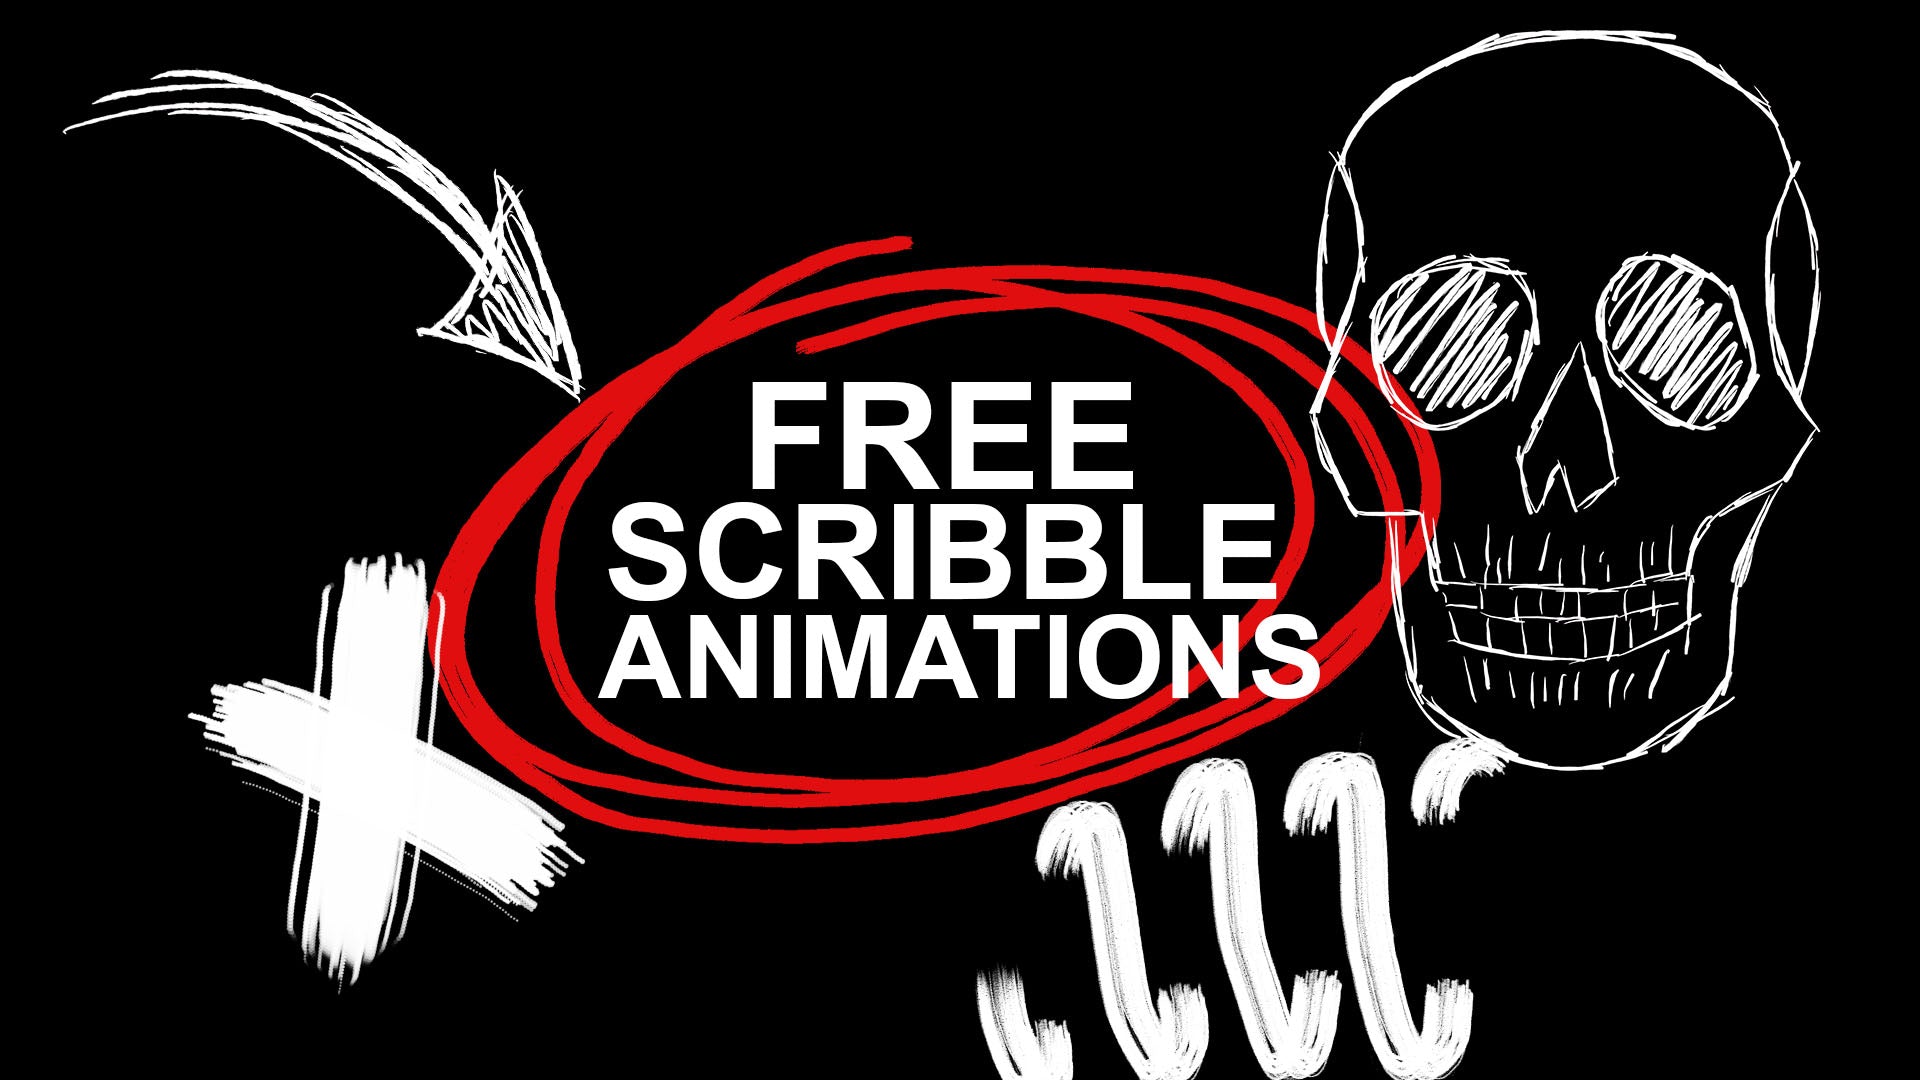 Skip the Stress of Animating by Downloading our FREE Scribble Animation Video Effects!